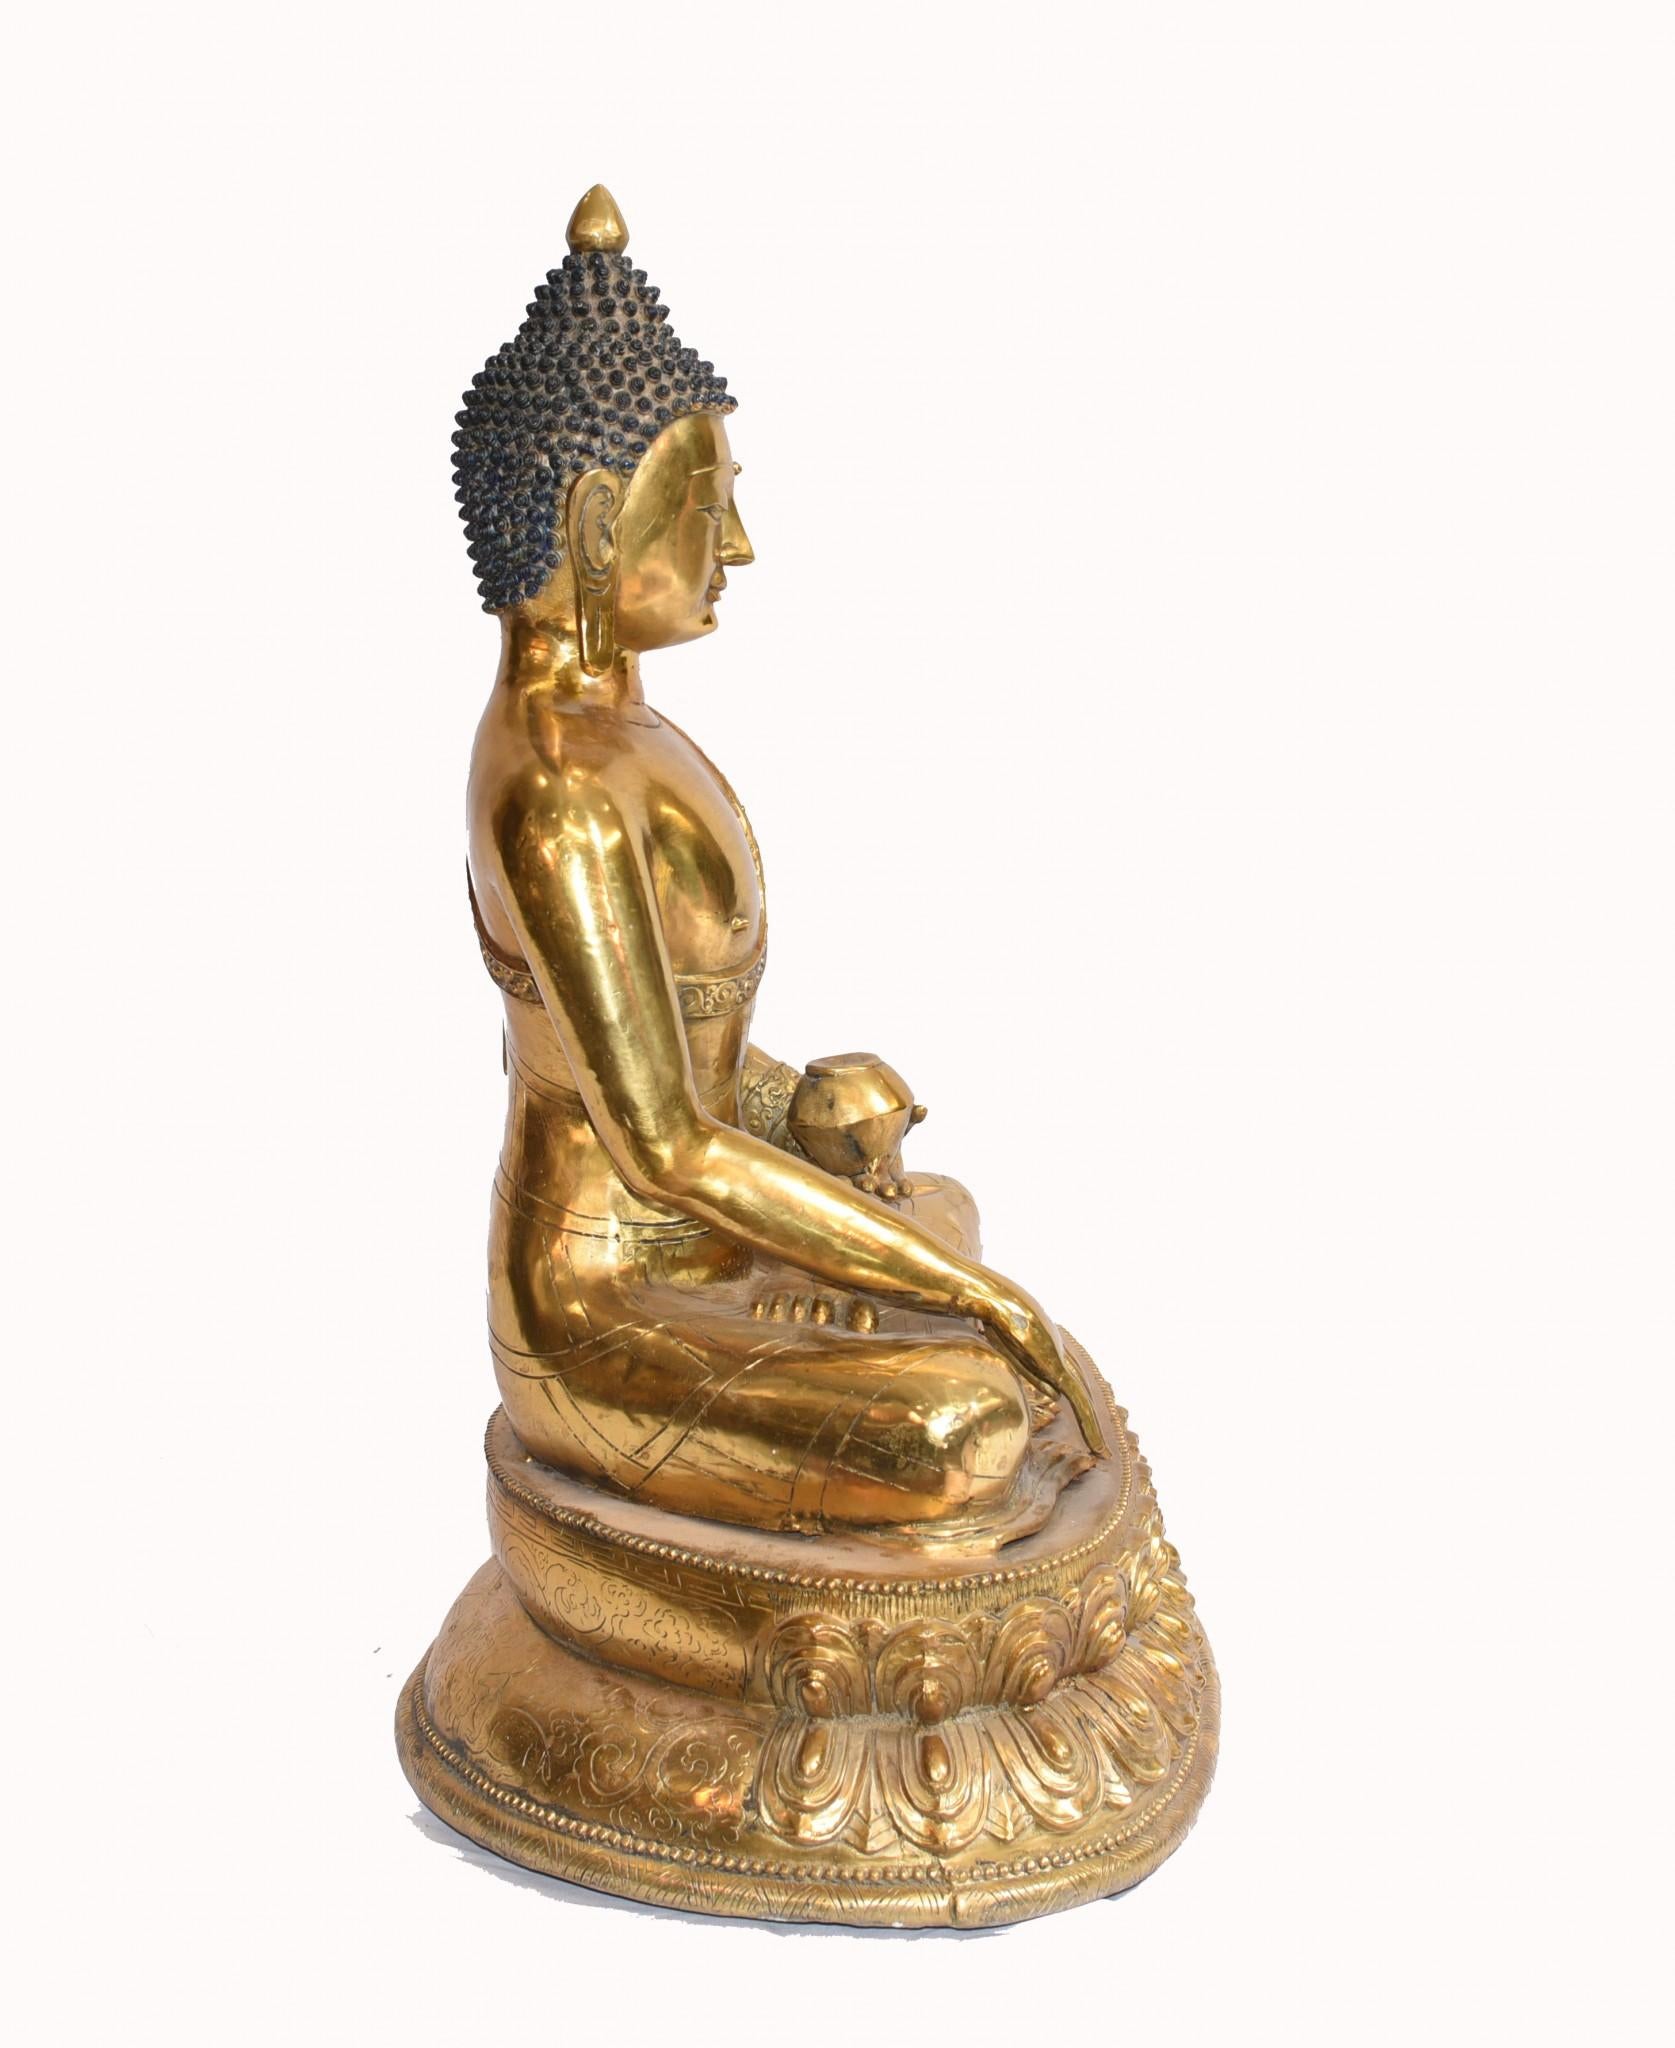 Nepalese Buddha Statue Meditation Casting Lotus Throne Sculpture For Sale 3